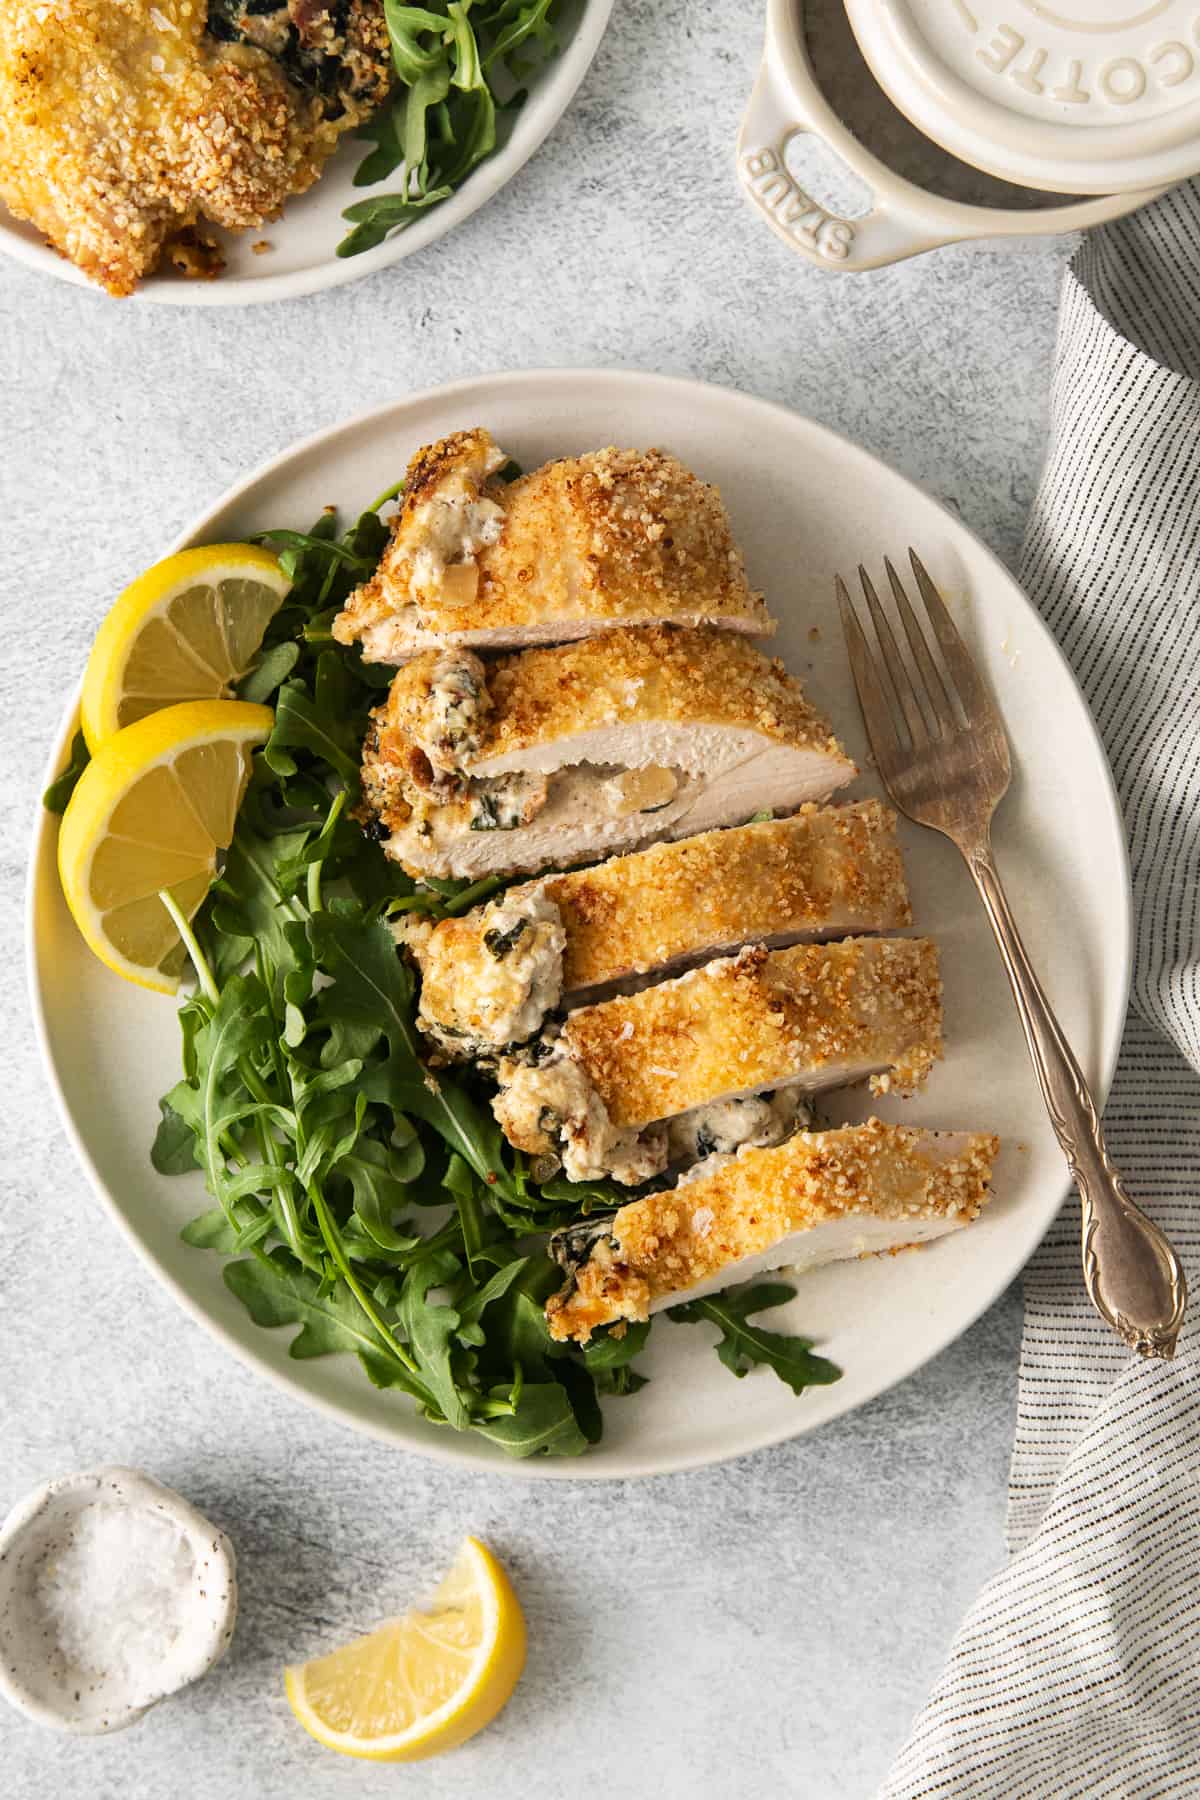 Cream cheese stuffed chicken breast cut in slices on a plate.